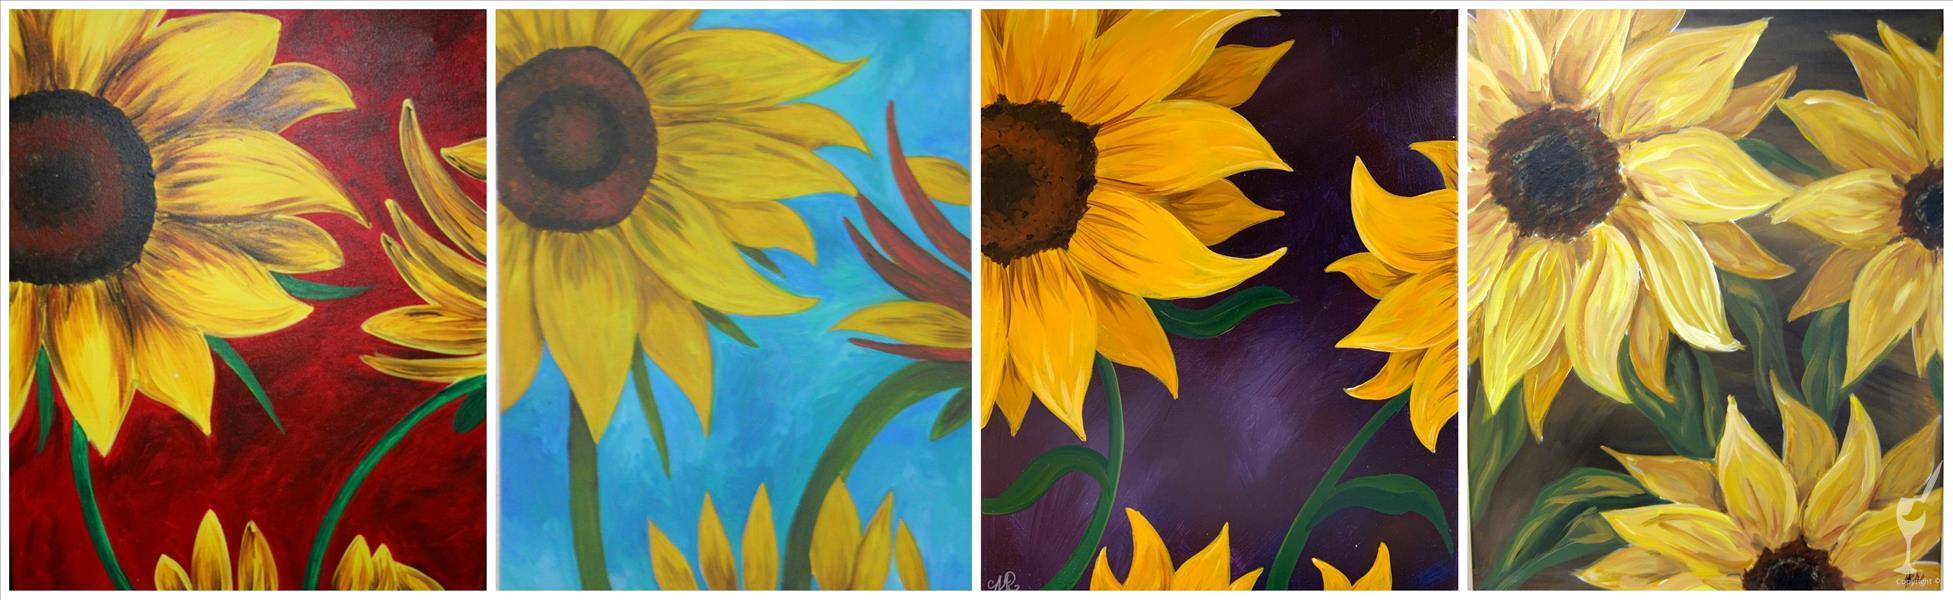 Sunflowers - Choose your color!